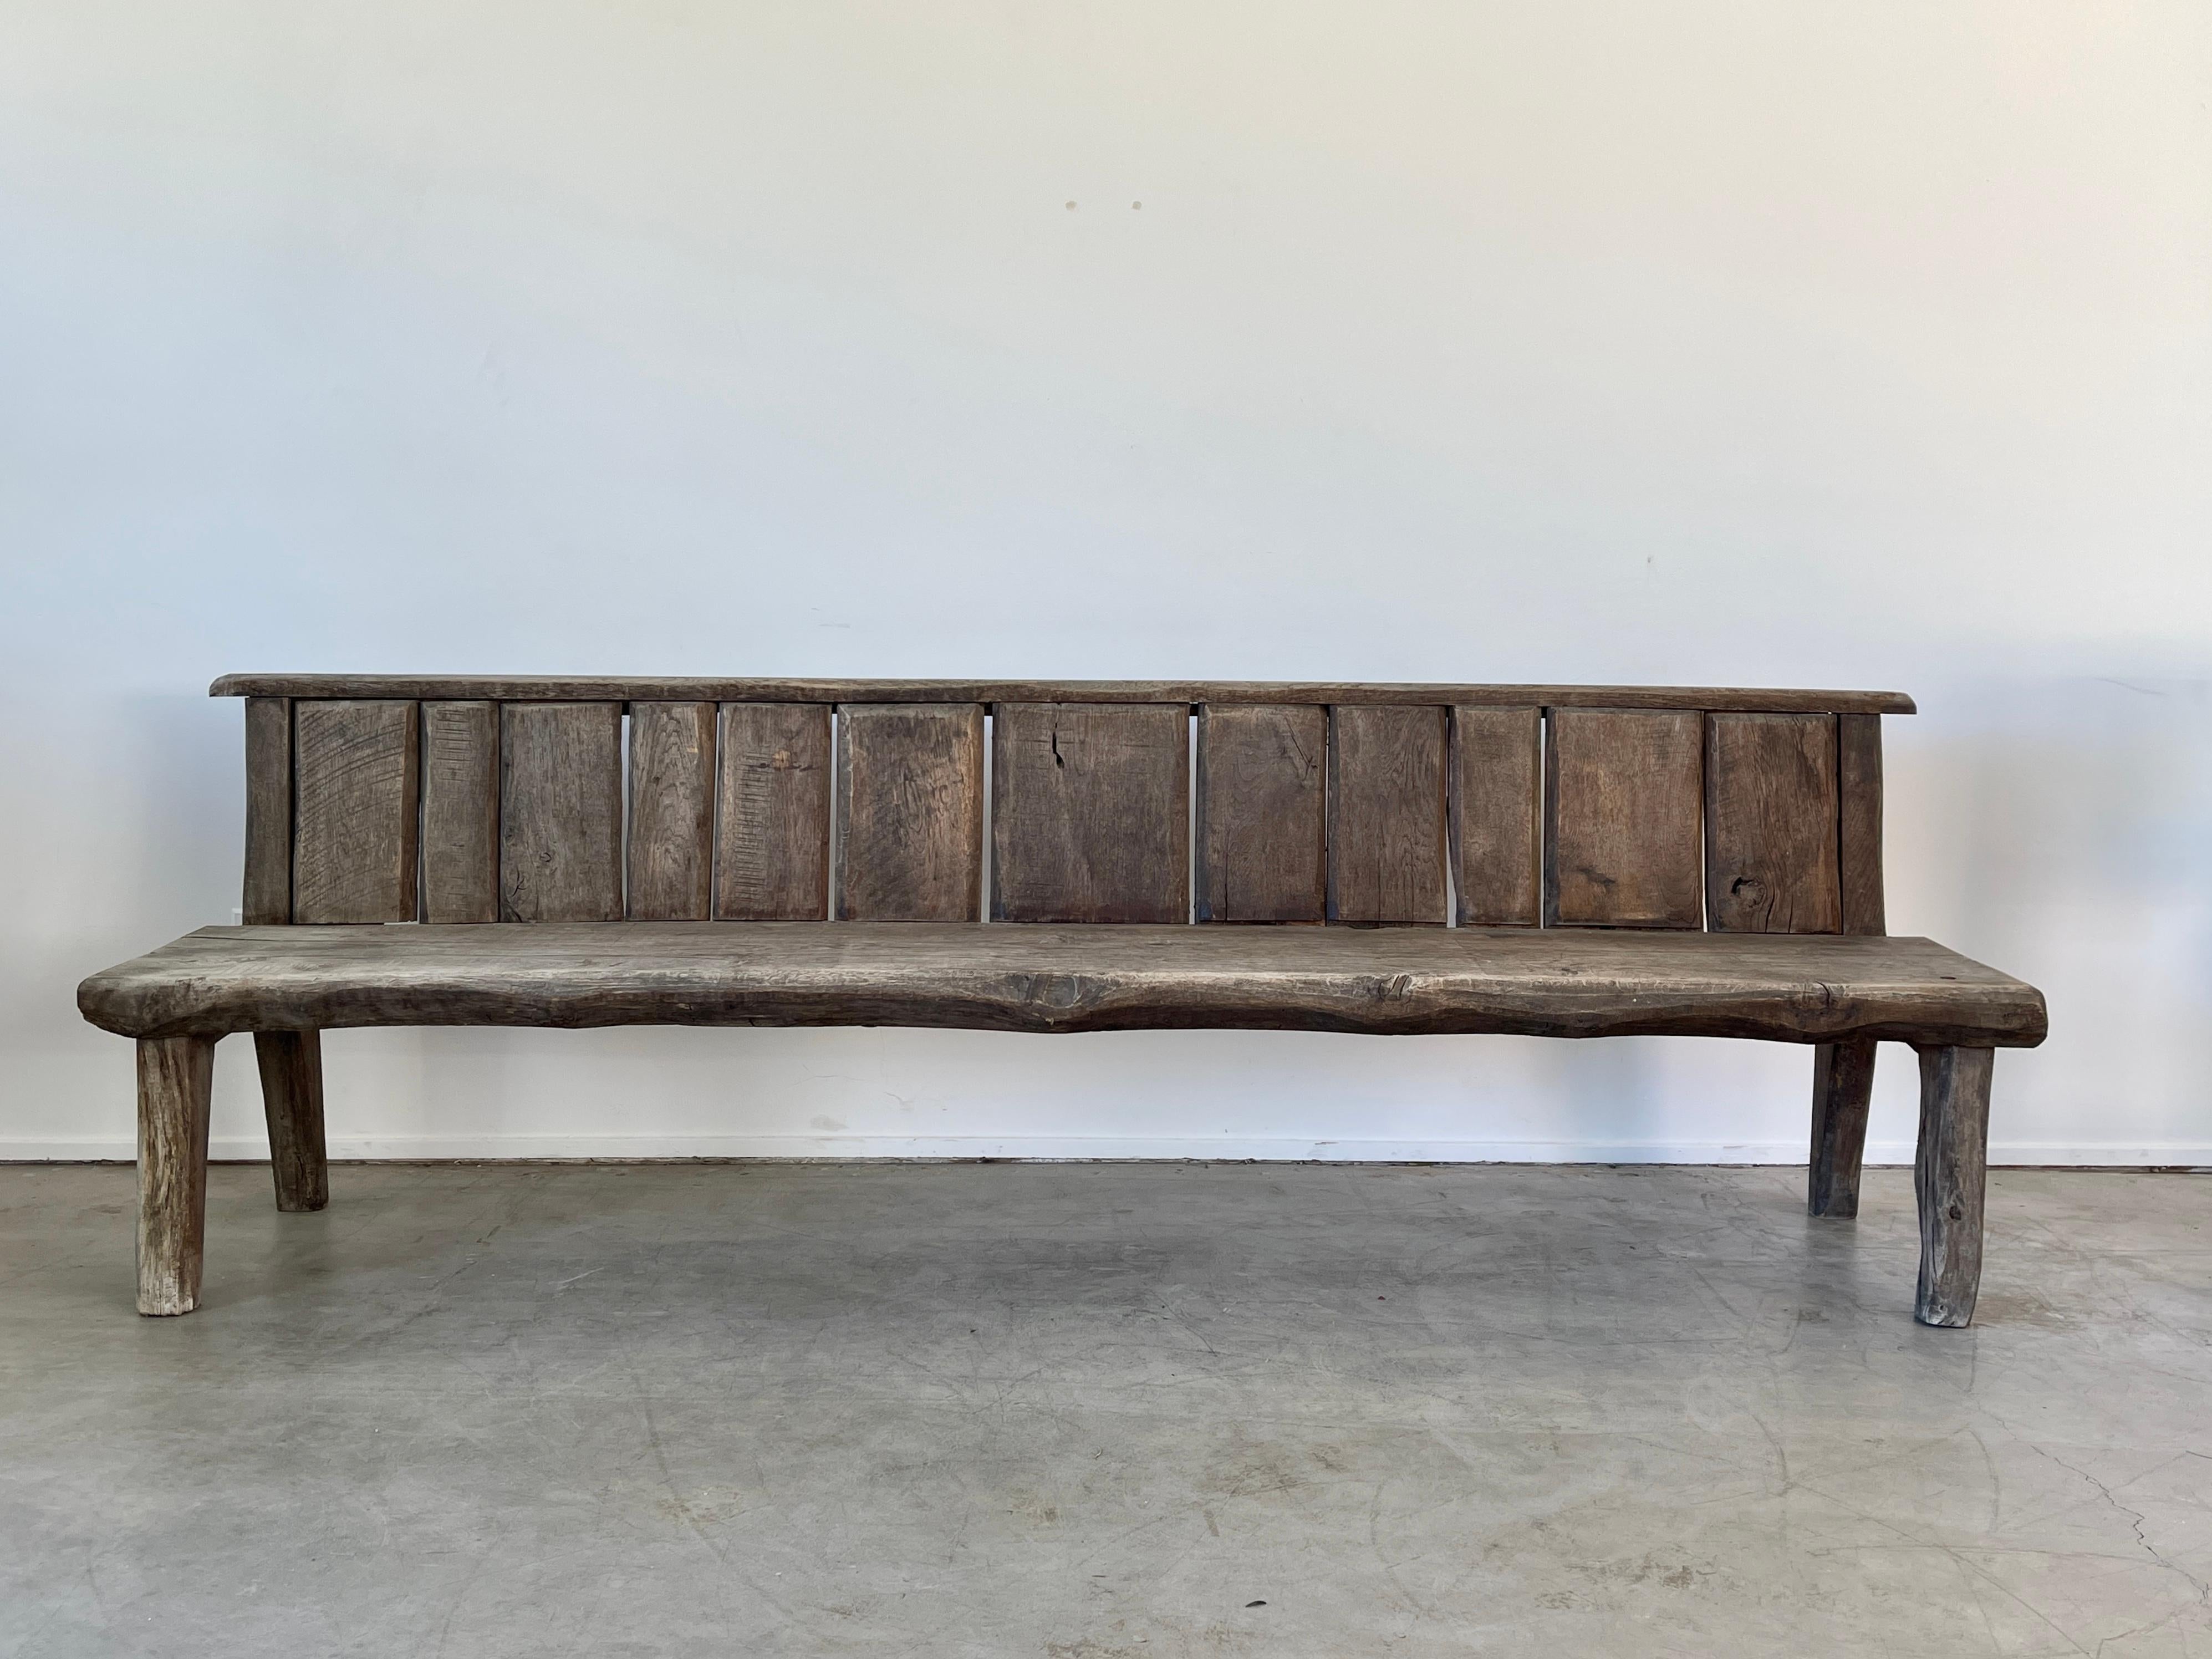 Huge French rustic bench in weathered oak with plank slatted back, circa 1950's 
Seats are one solid piece of oak - 3